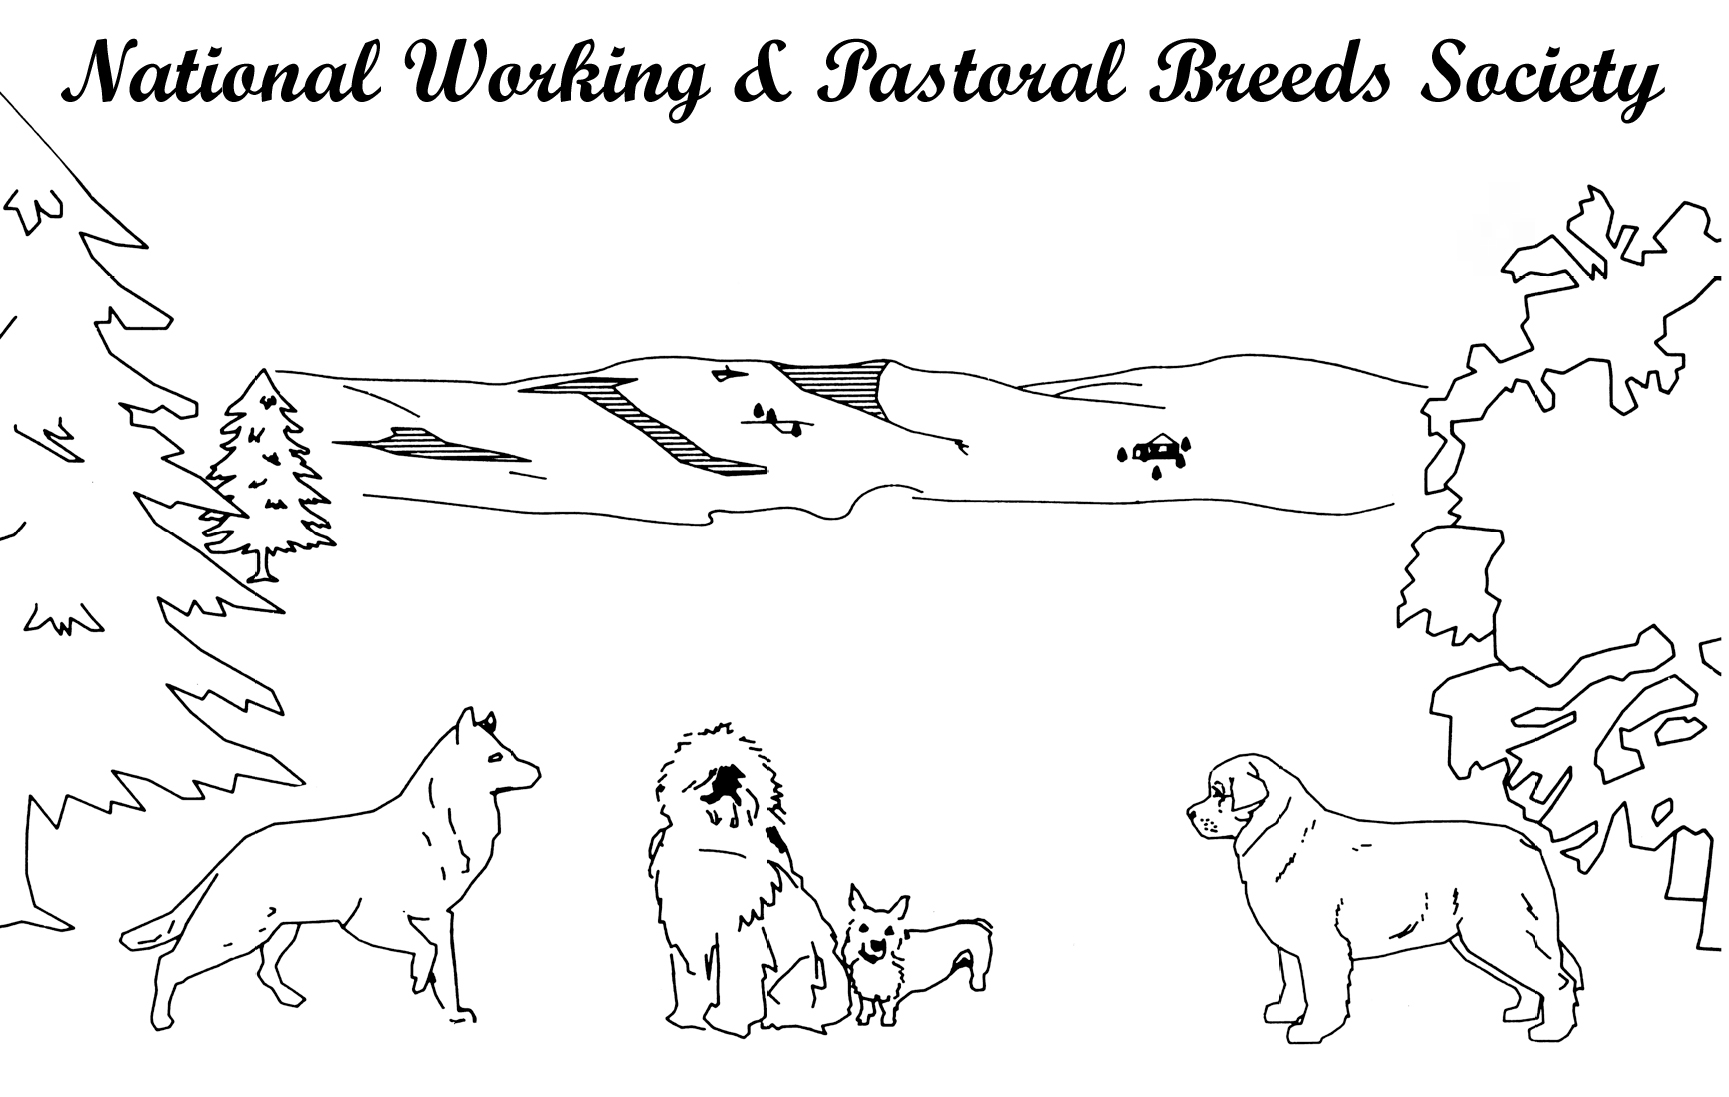 NATIONAL WORKING & PASTORAL BREEDS SOCIETY